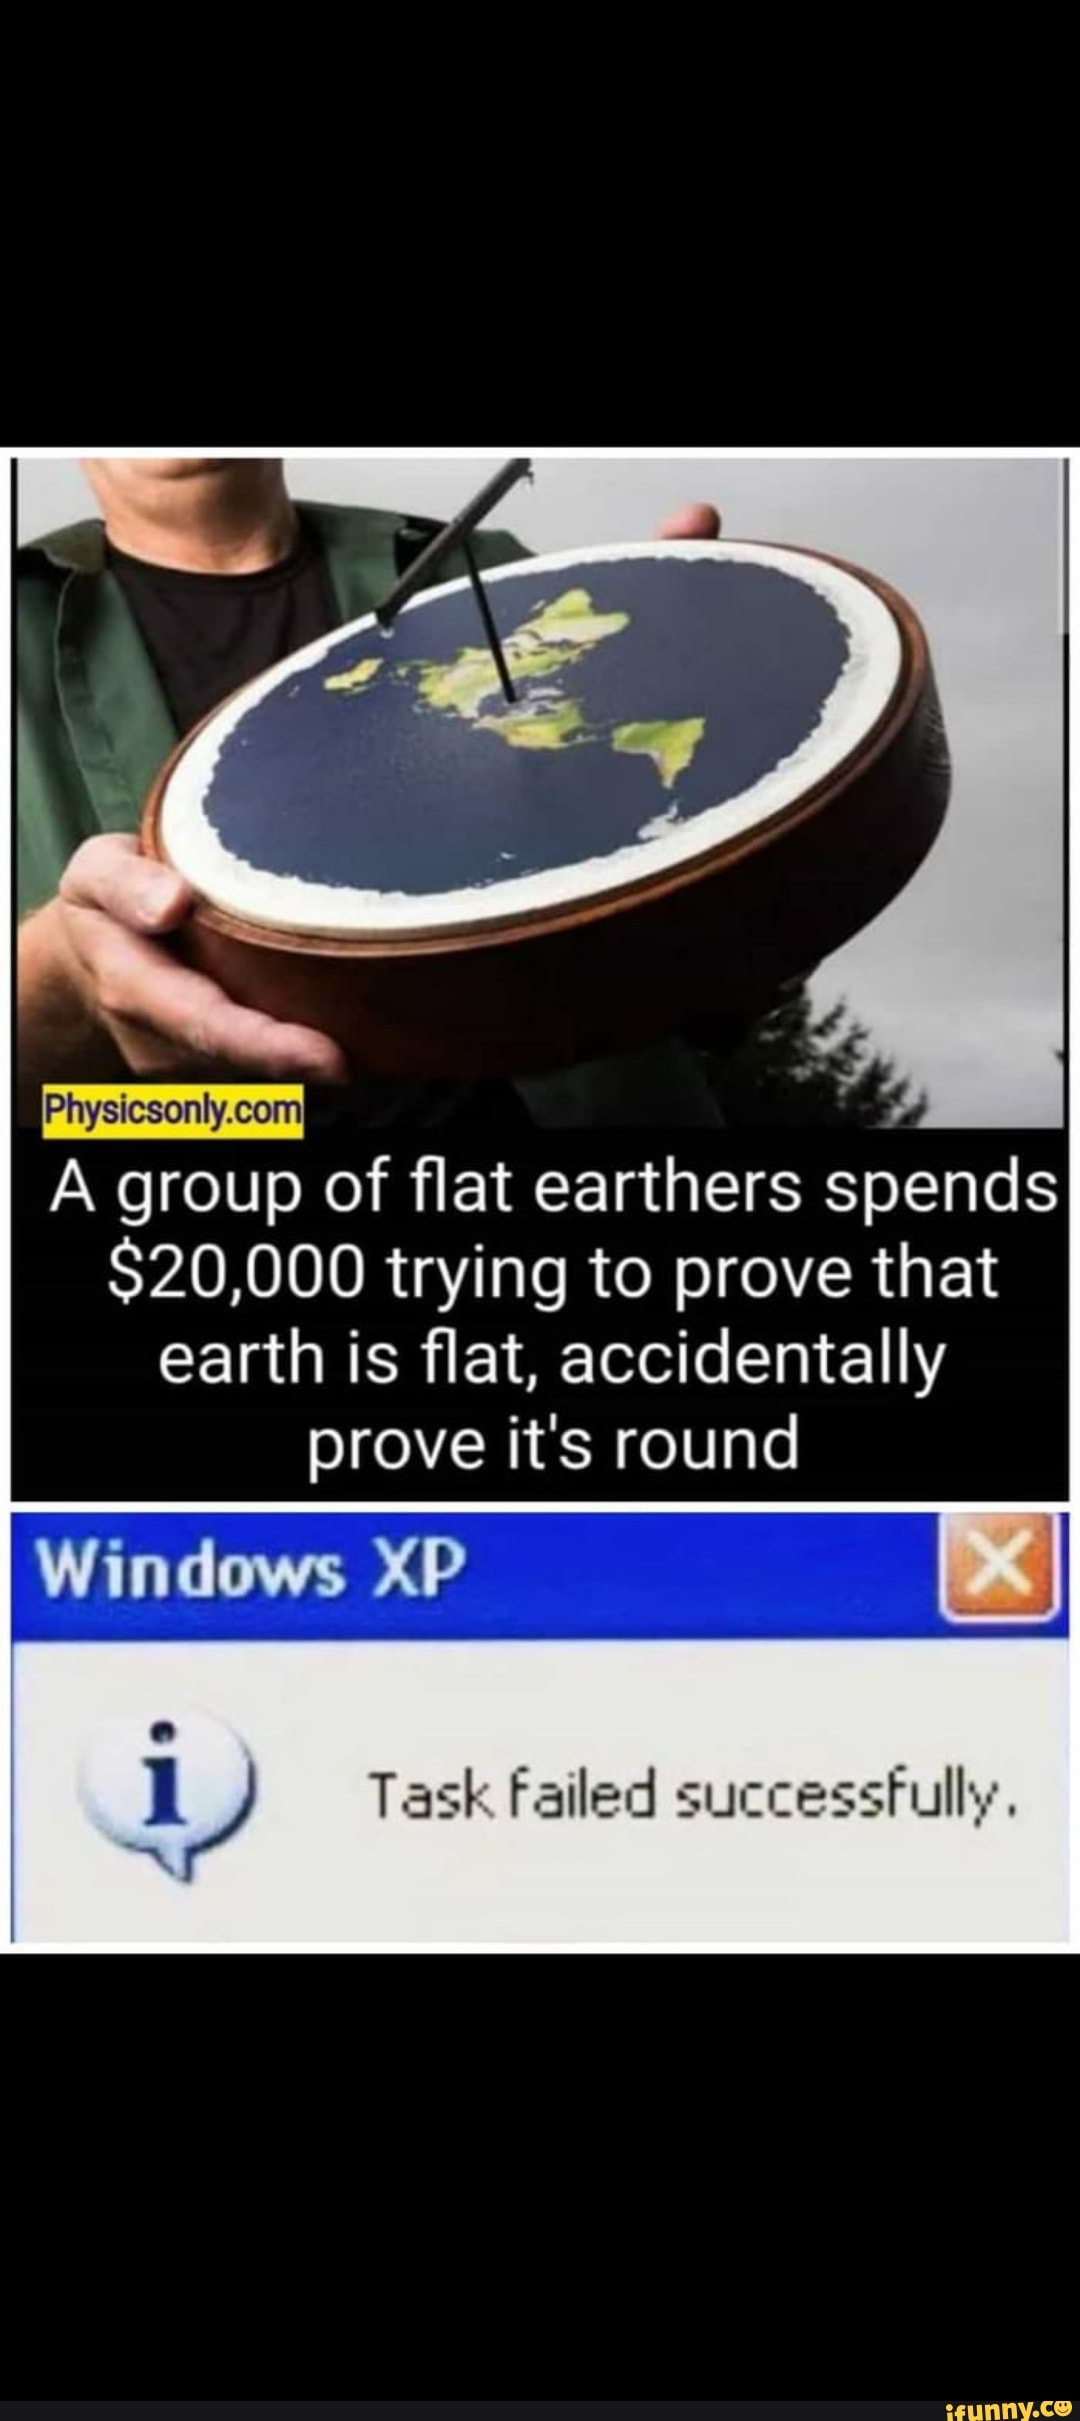 flat earthers accidentally prove earth is round